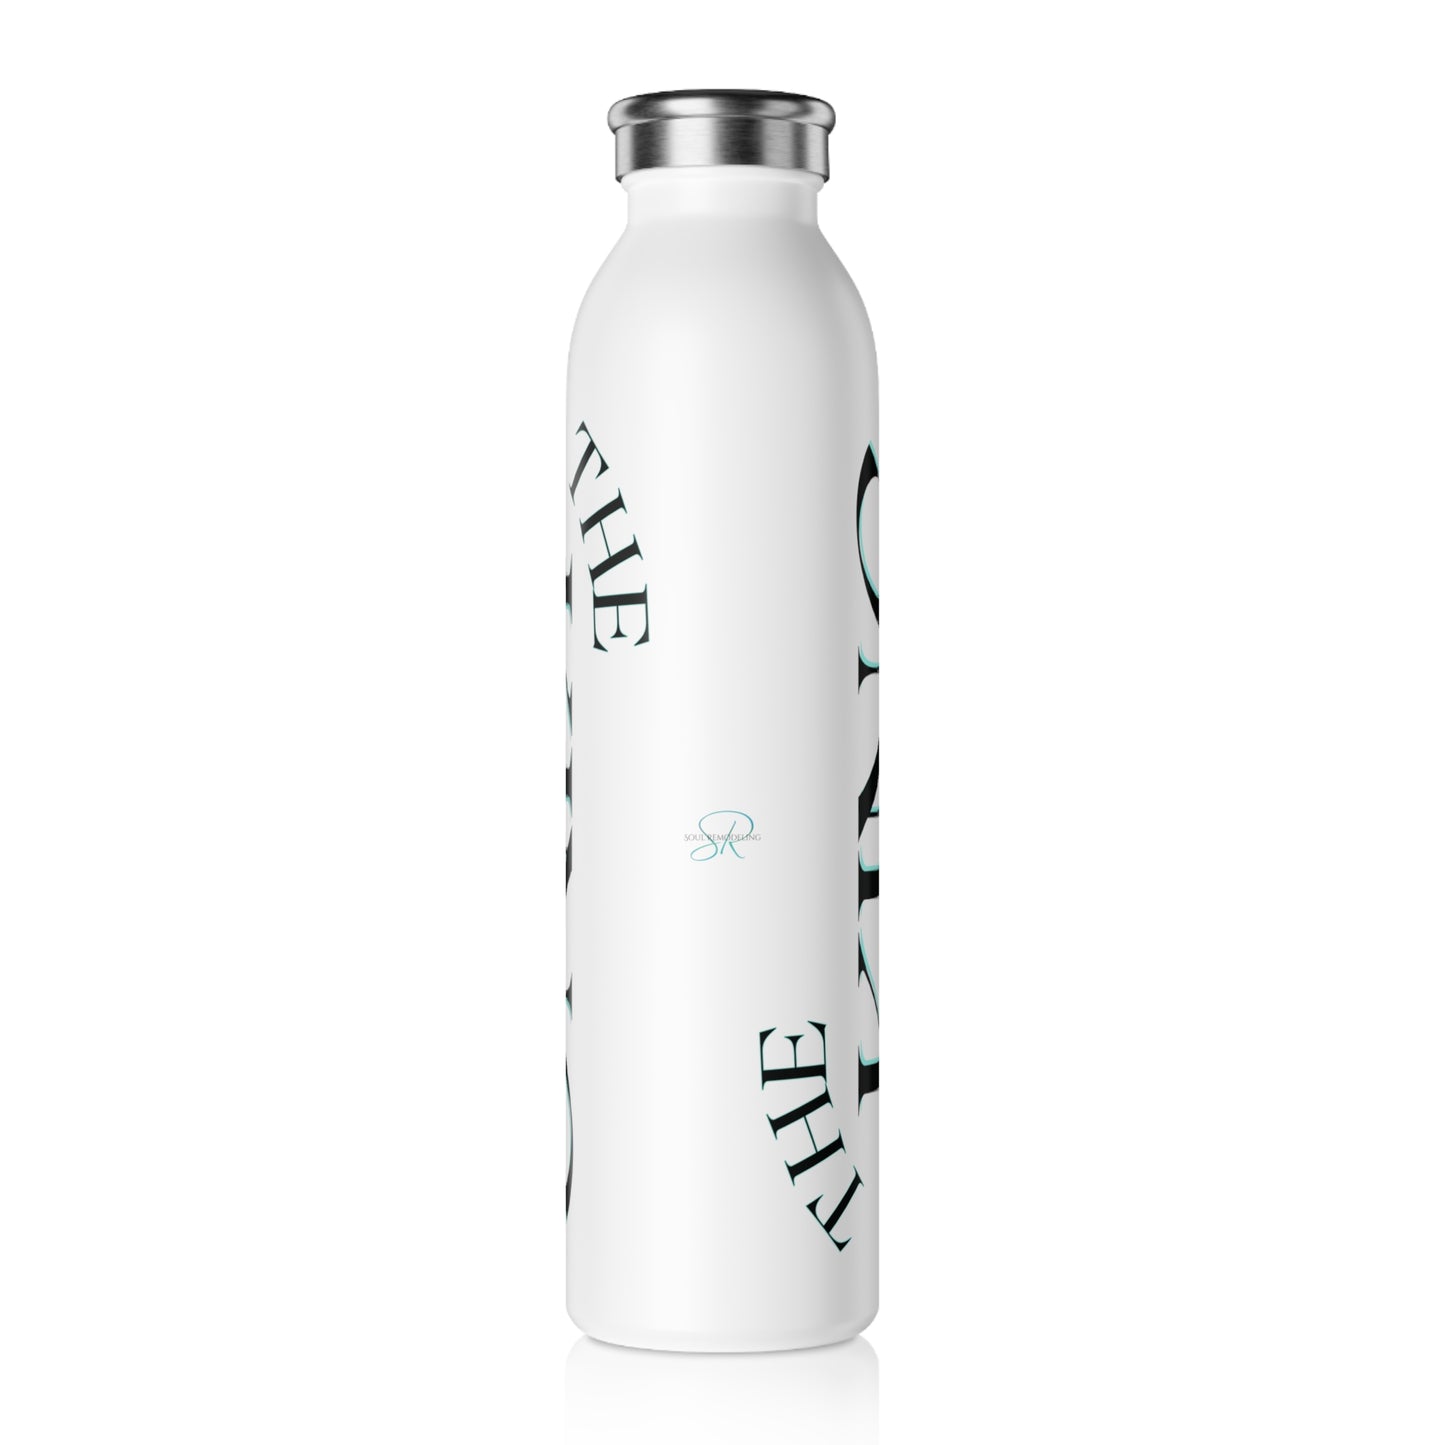 "The King" Water Bottle